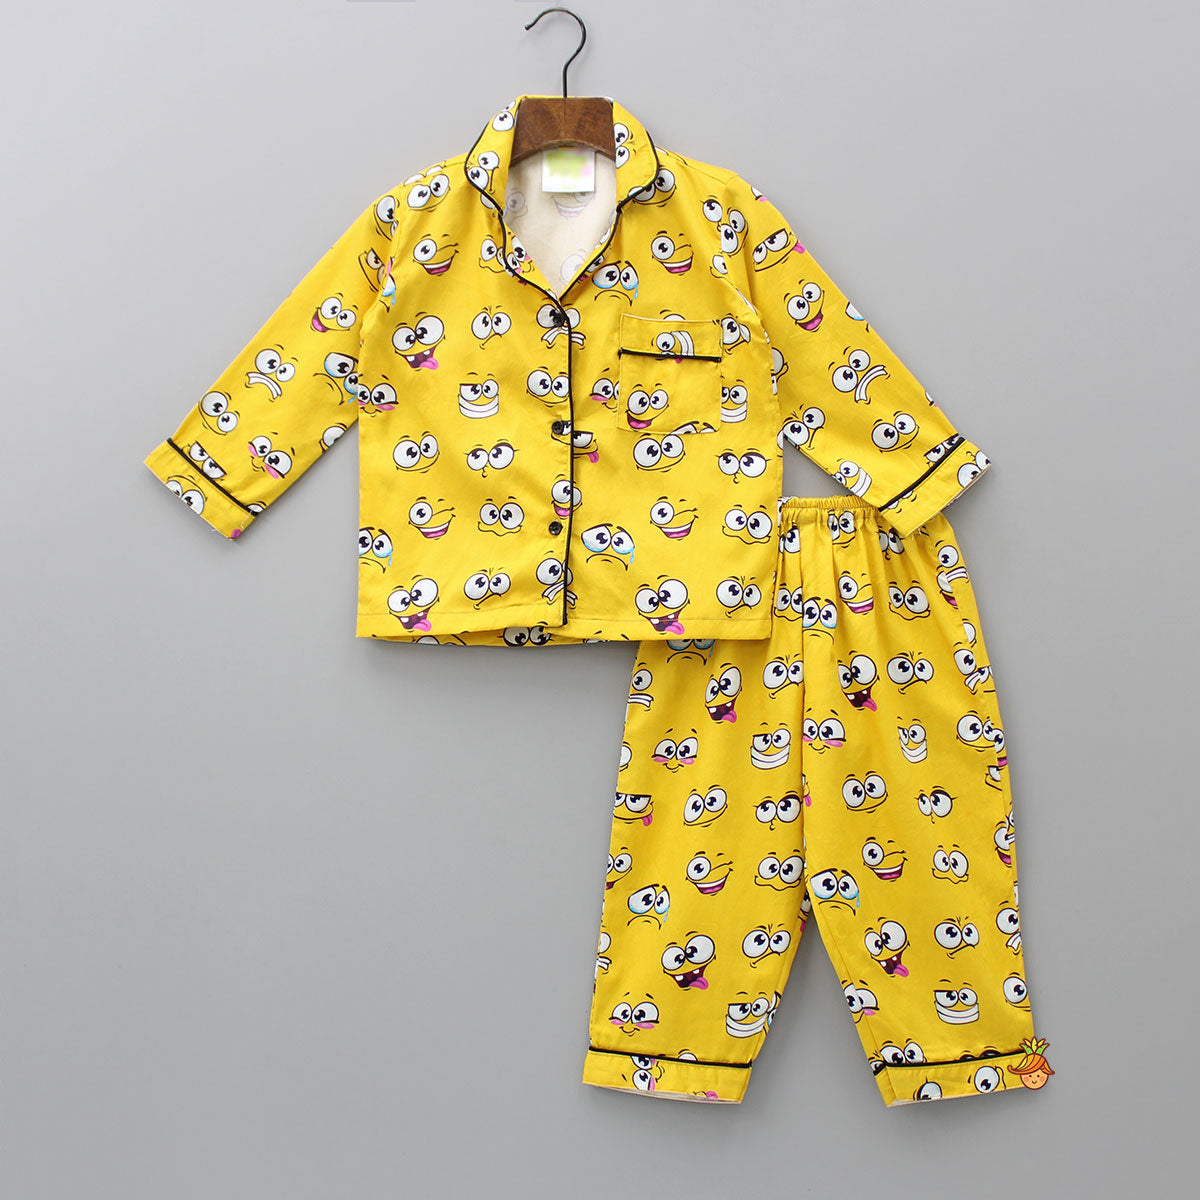 Facial Expressions Printed Pure Cotton Mustard Yellow Sleepwear